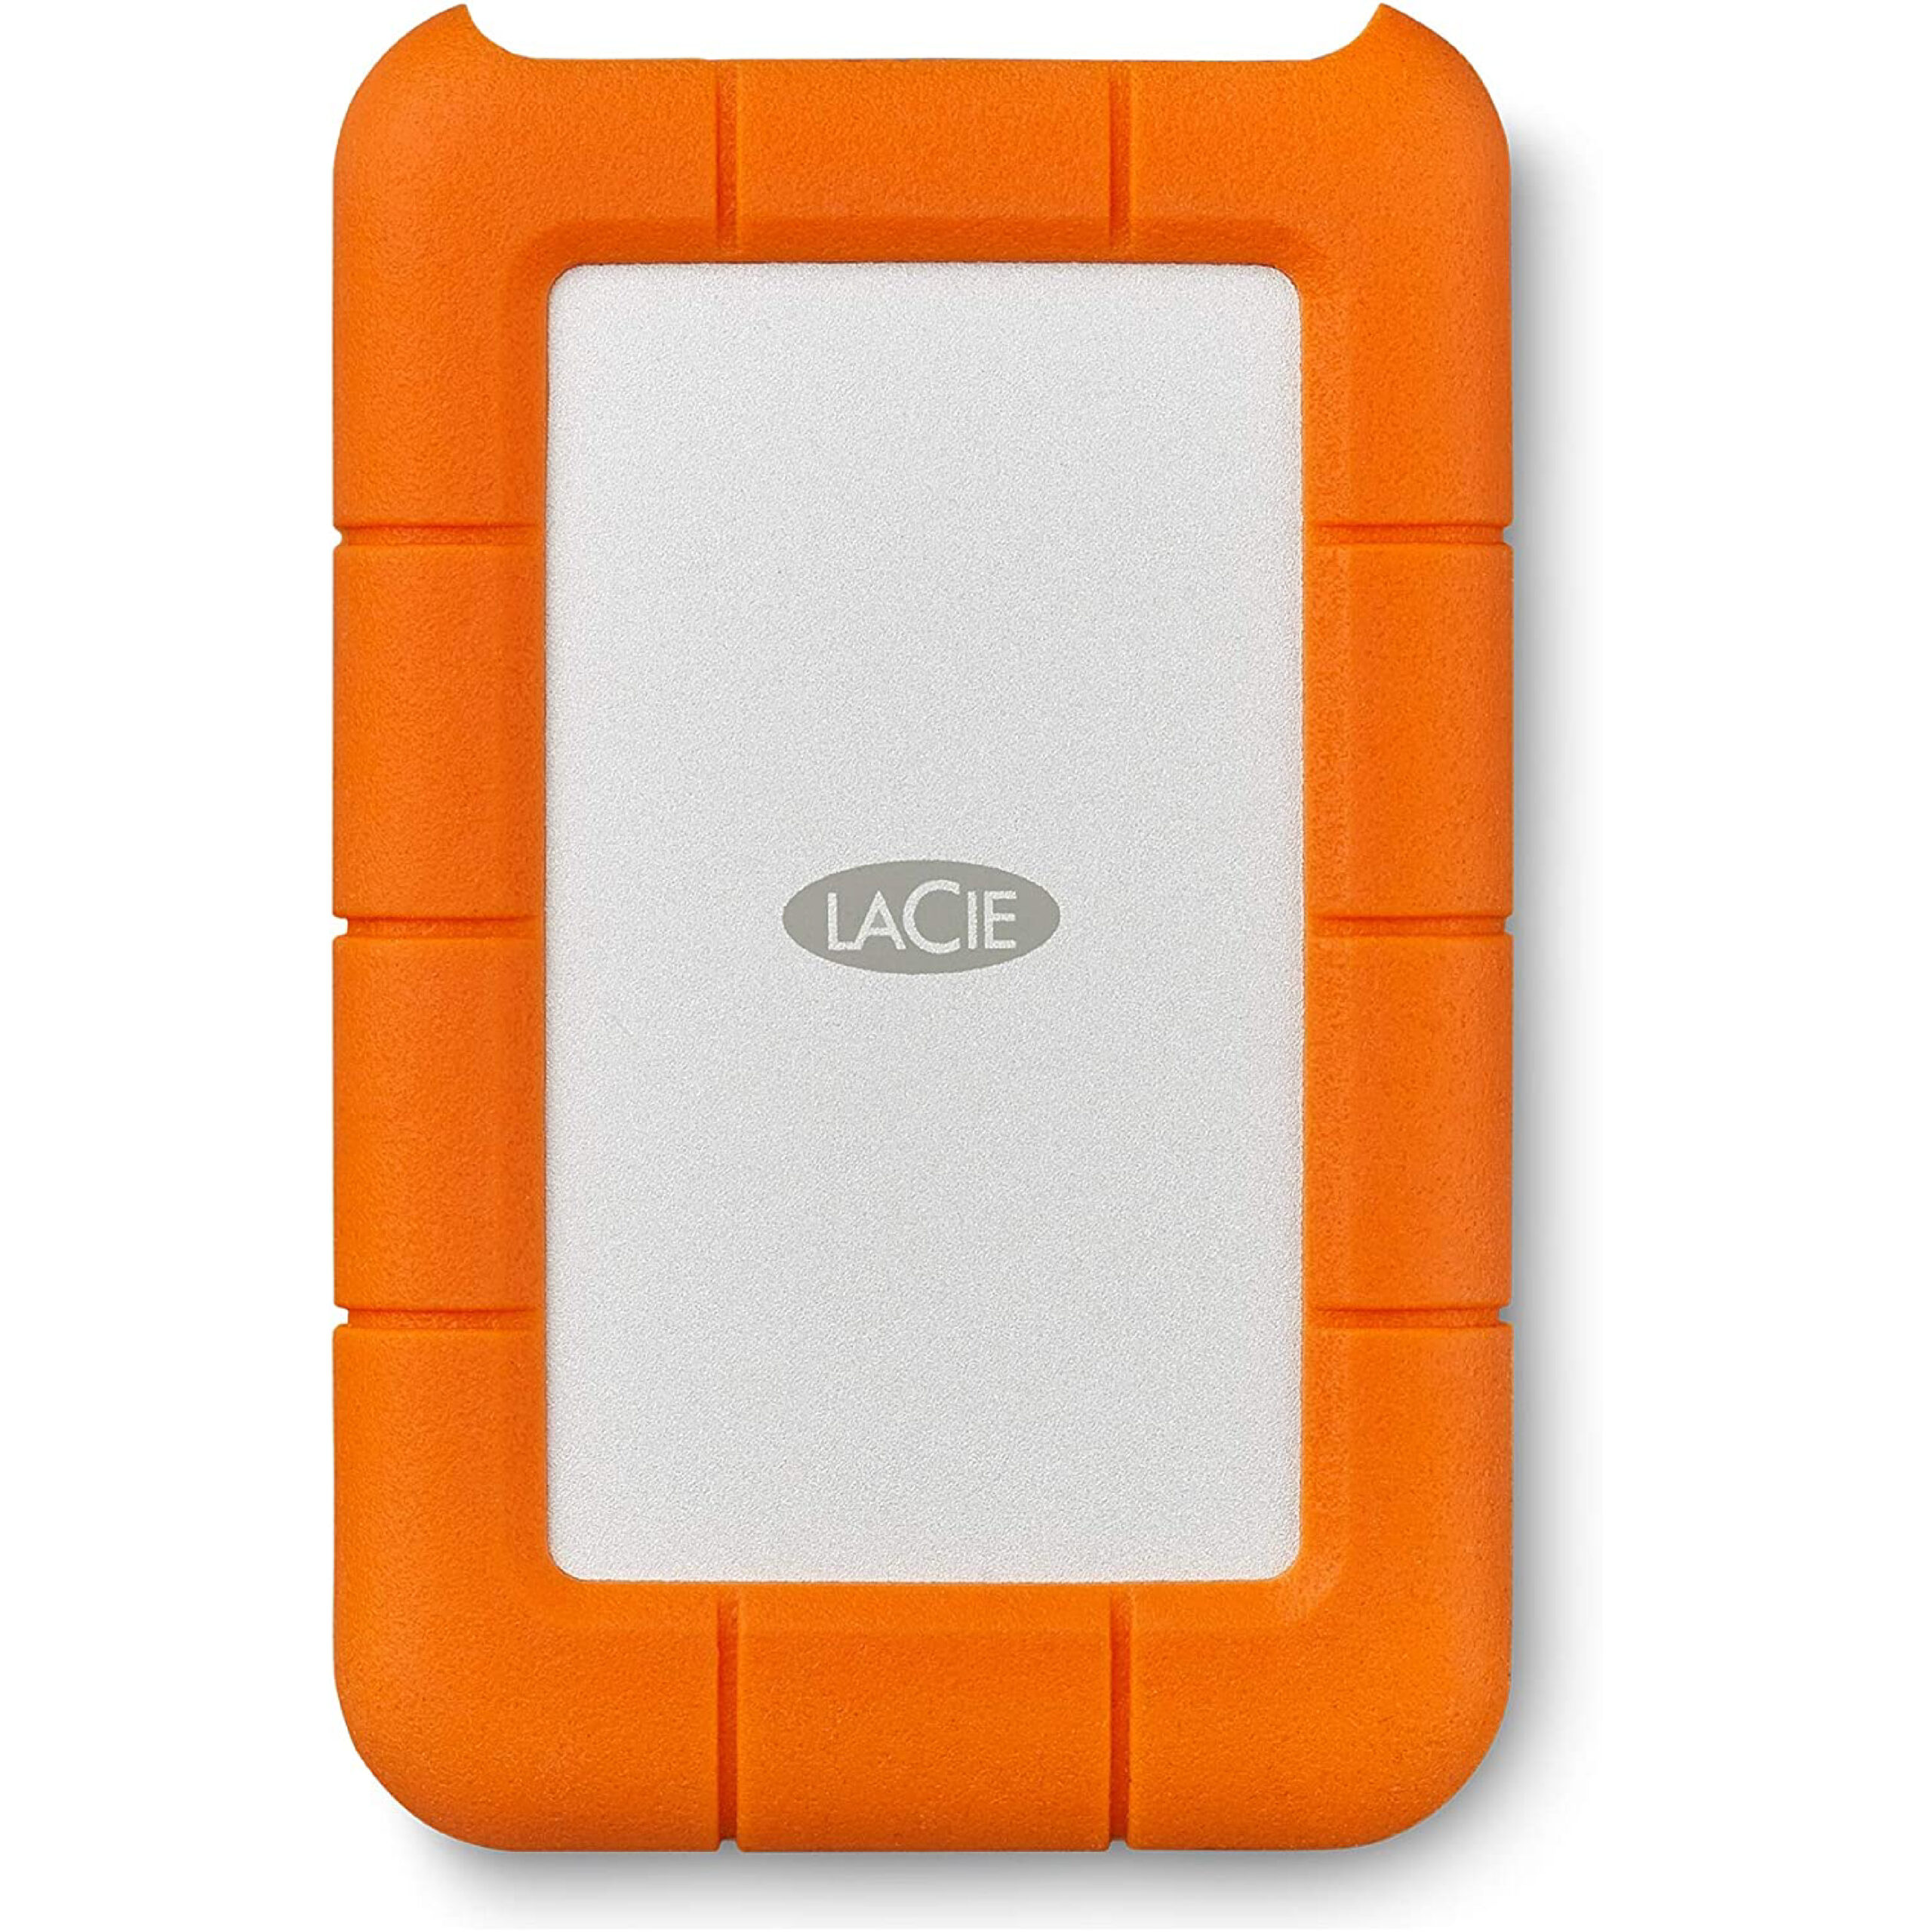 LaCie Rugged Mini 4TB External Hard Drive. Patrick Will's external hard drive for storing long podcast footage, content creation, and work.